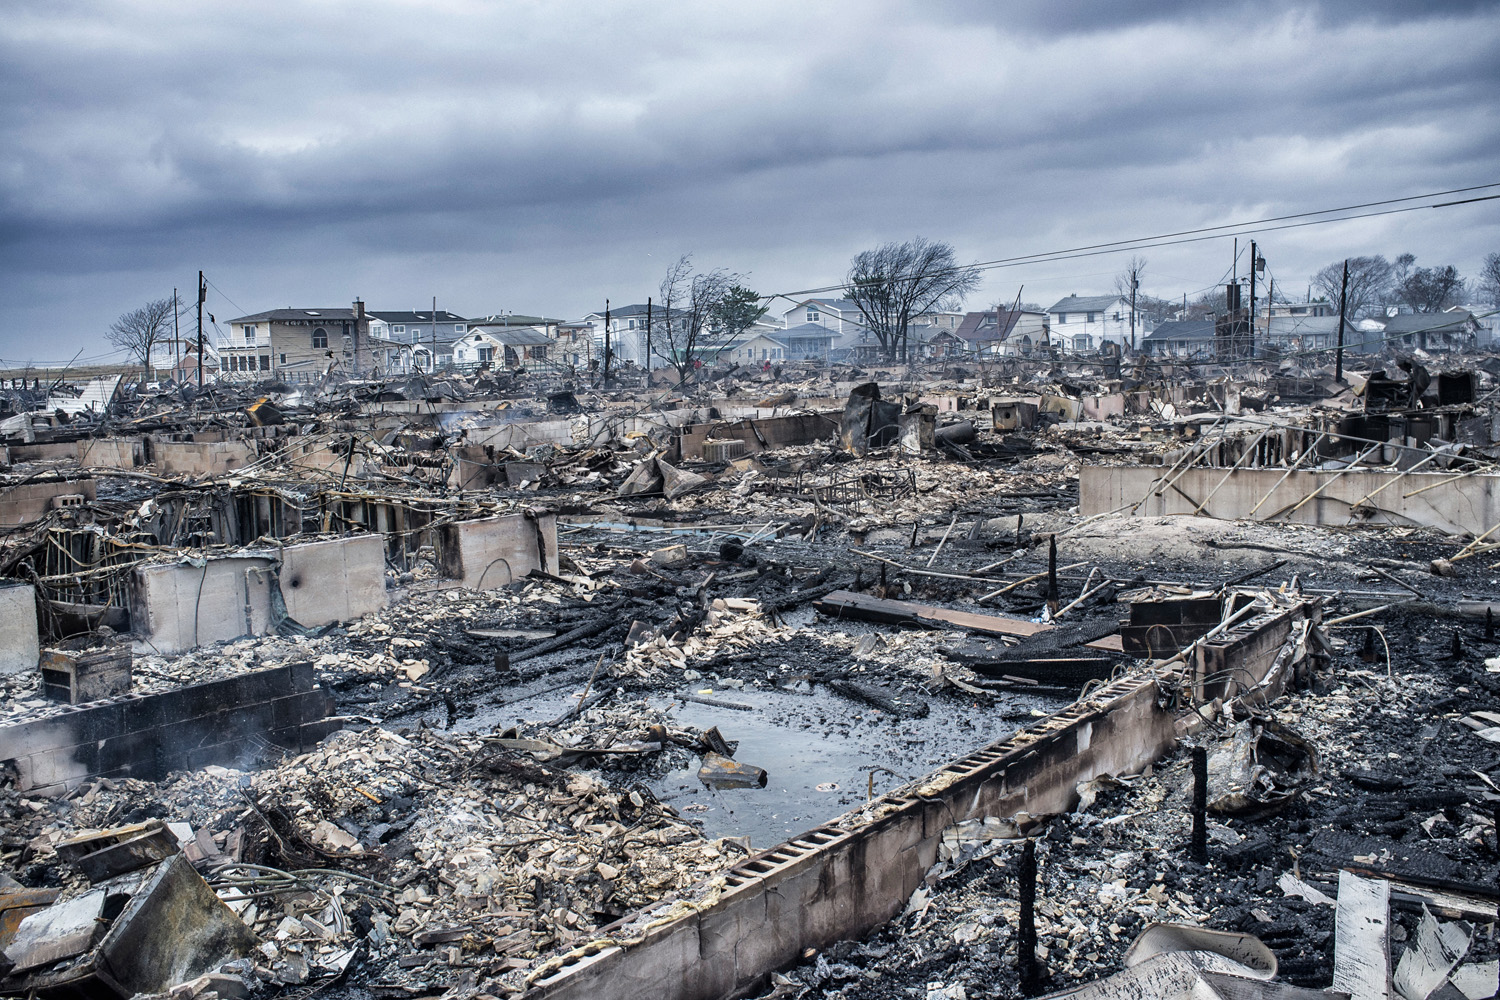 Image: Oct. 30, 2012. The Breezy Point section of Queens, N.Y. after it sustained devastating damage during Hurricane Sandy.